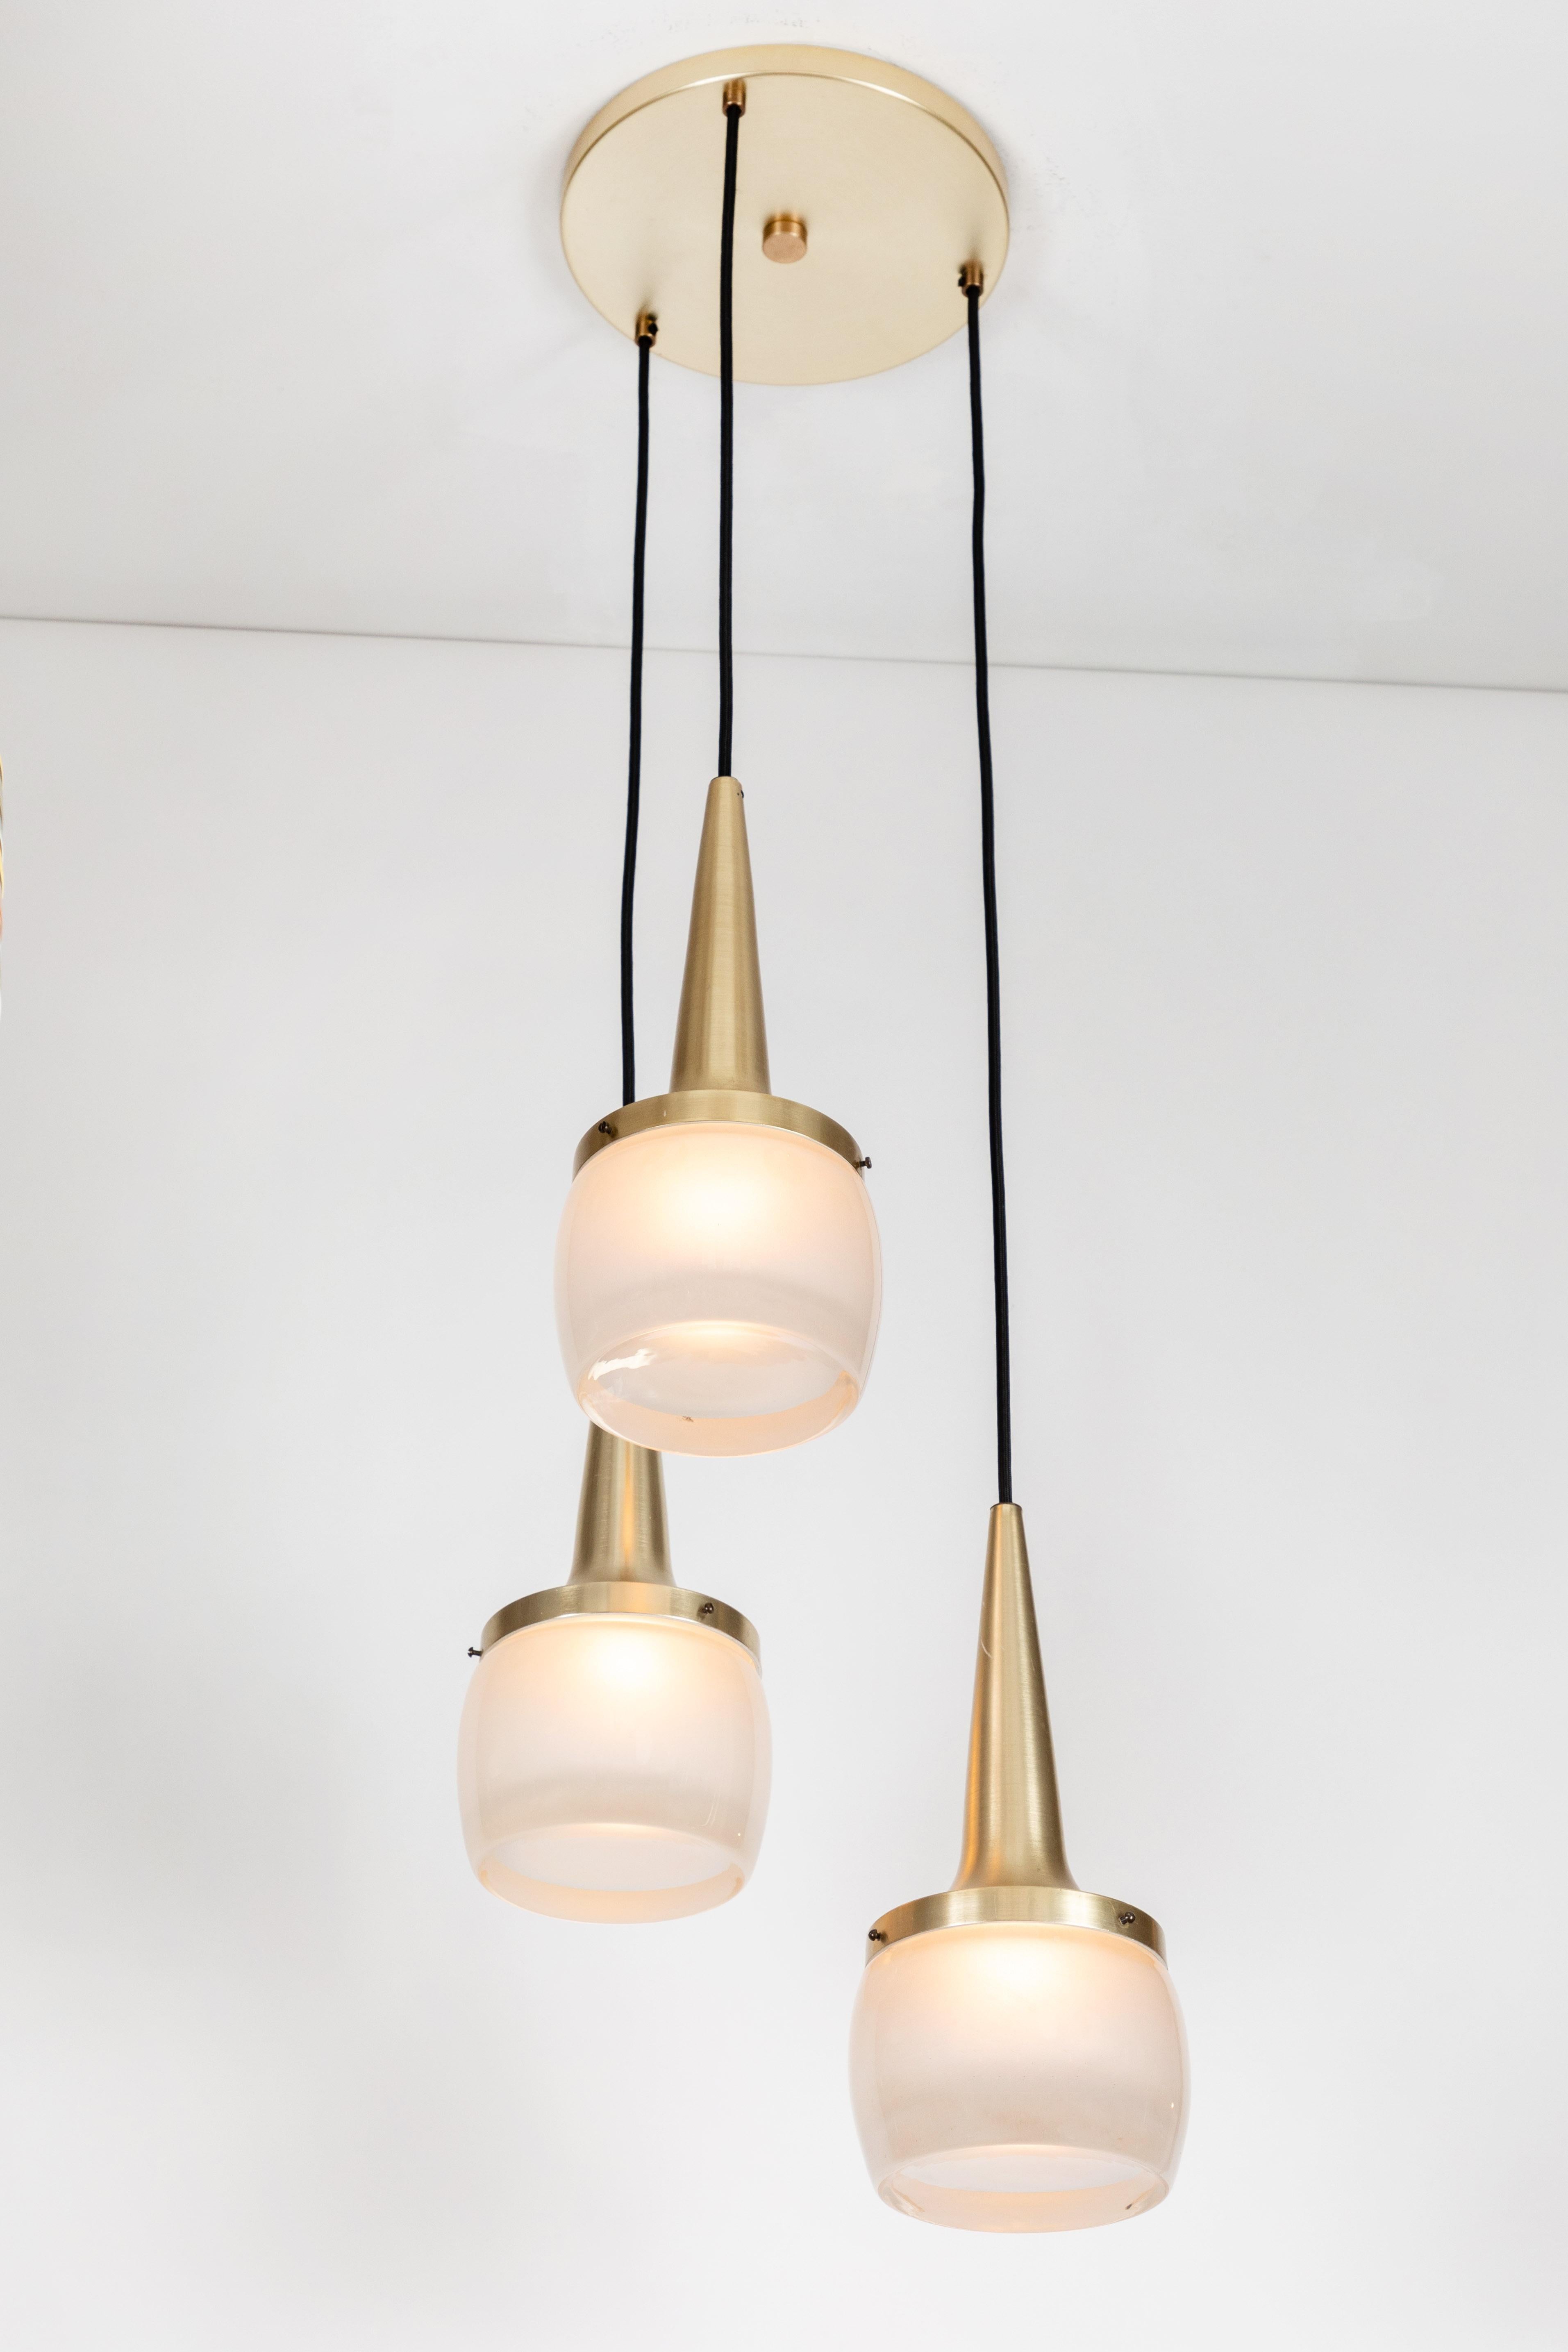 1960s Staff Leuchten large pendant chandelier. Executed in brushed nickel brassed metal and thick opaline molded glass etched on the inside, with brass canopy and thick cloth cord, Germany, circa 1960s. Each individual pendant measures 13.5 in.